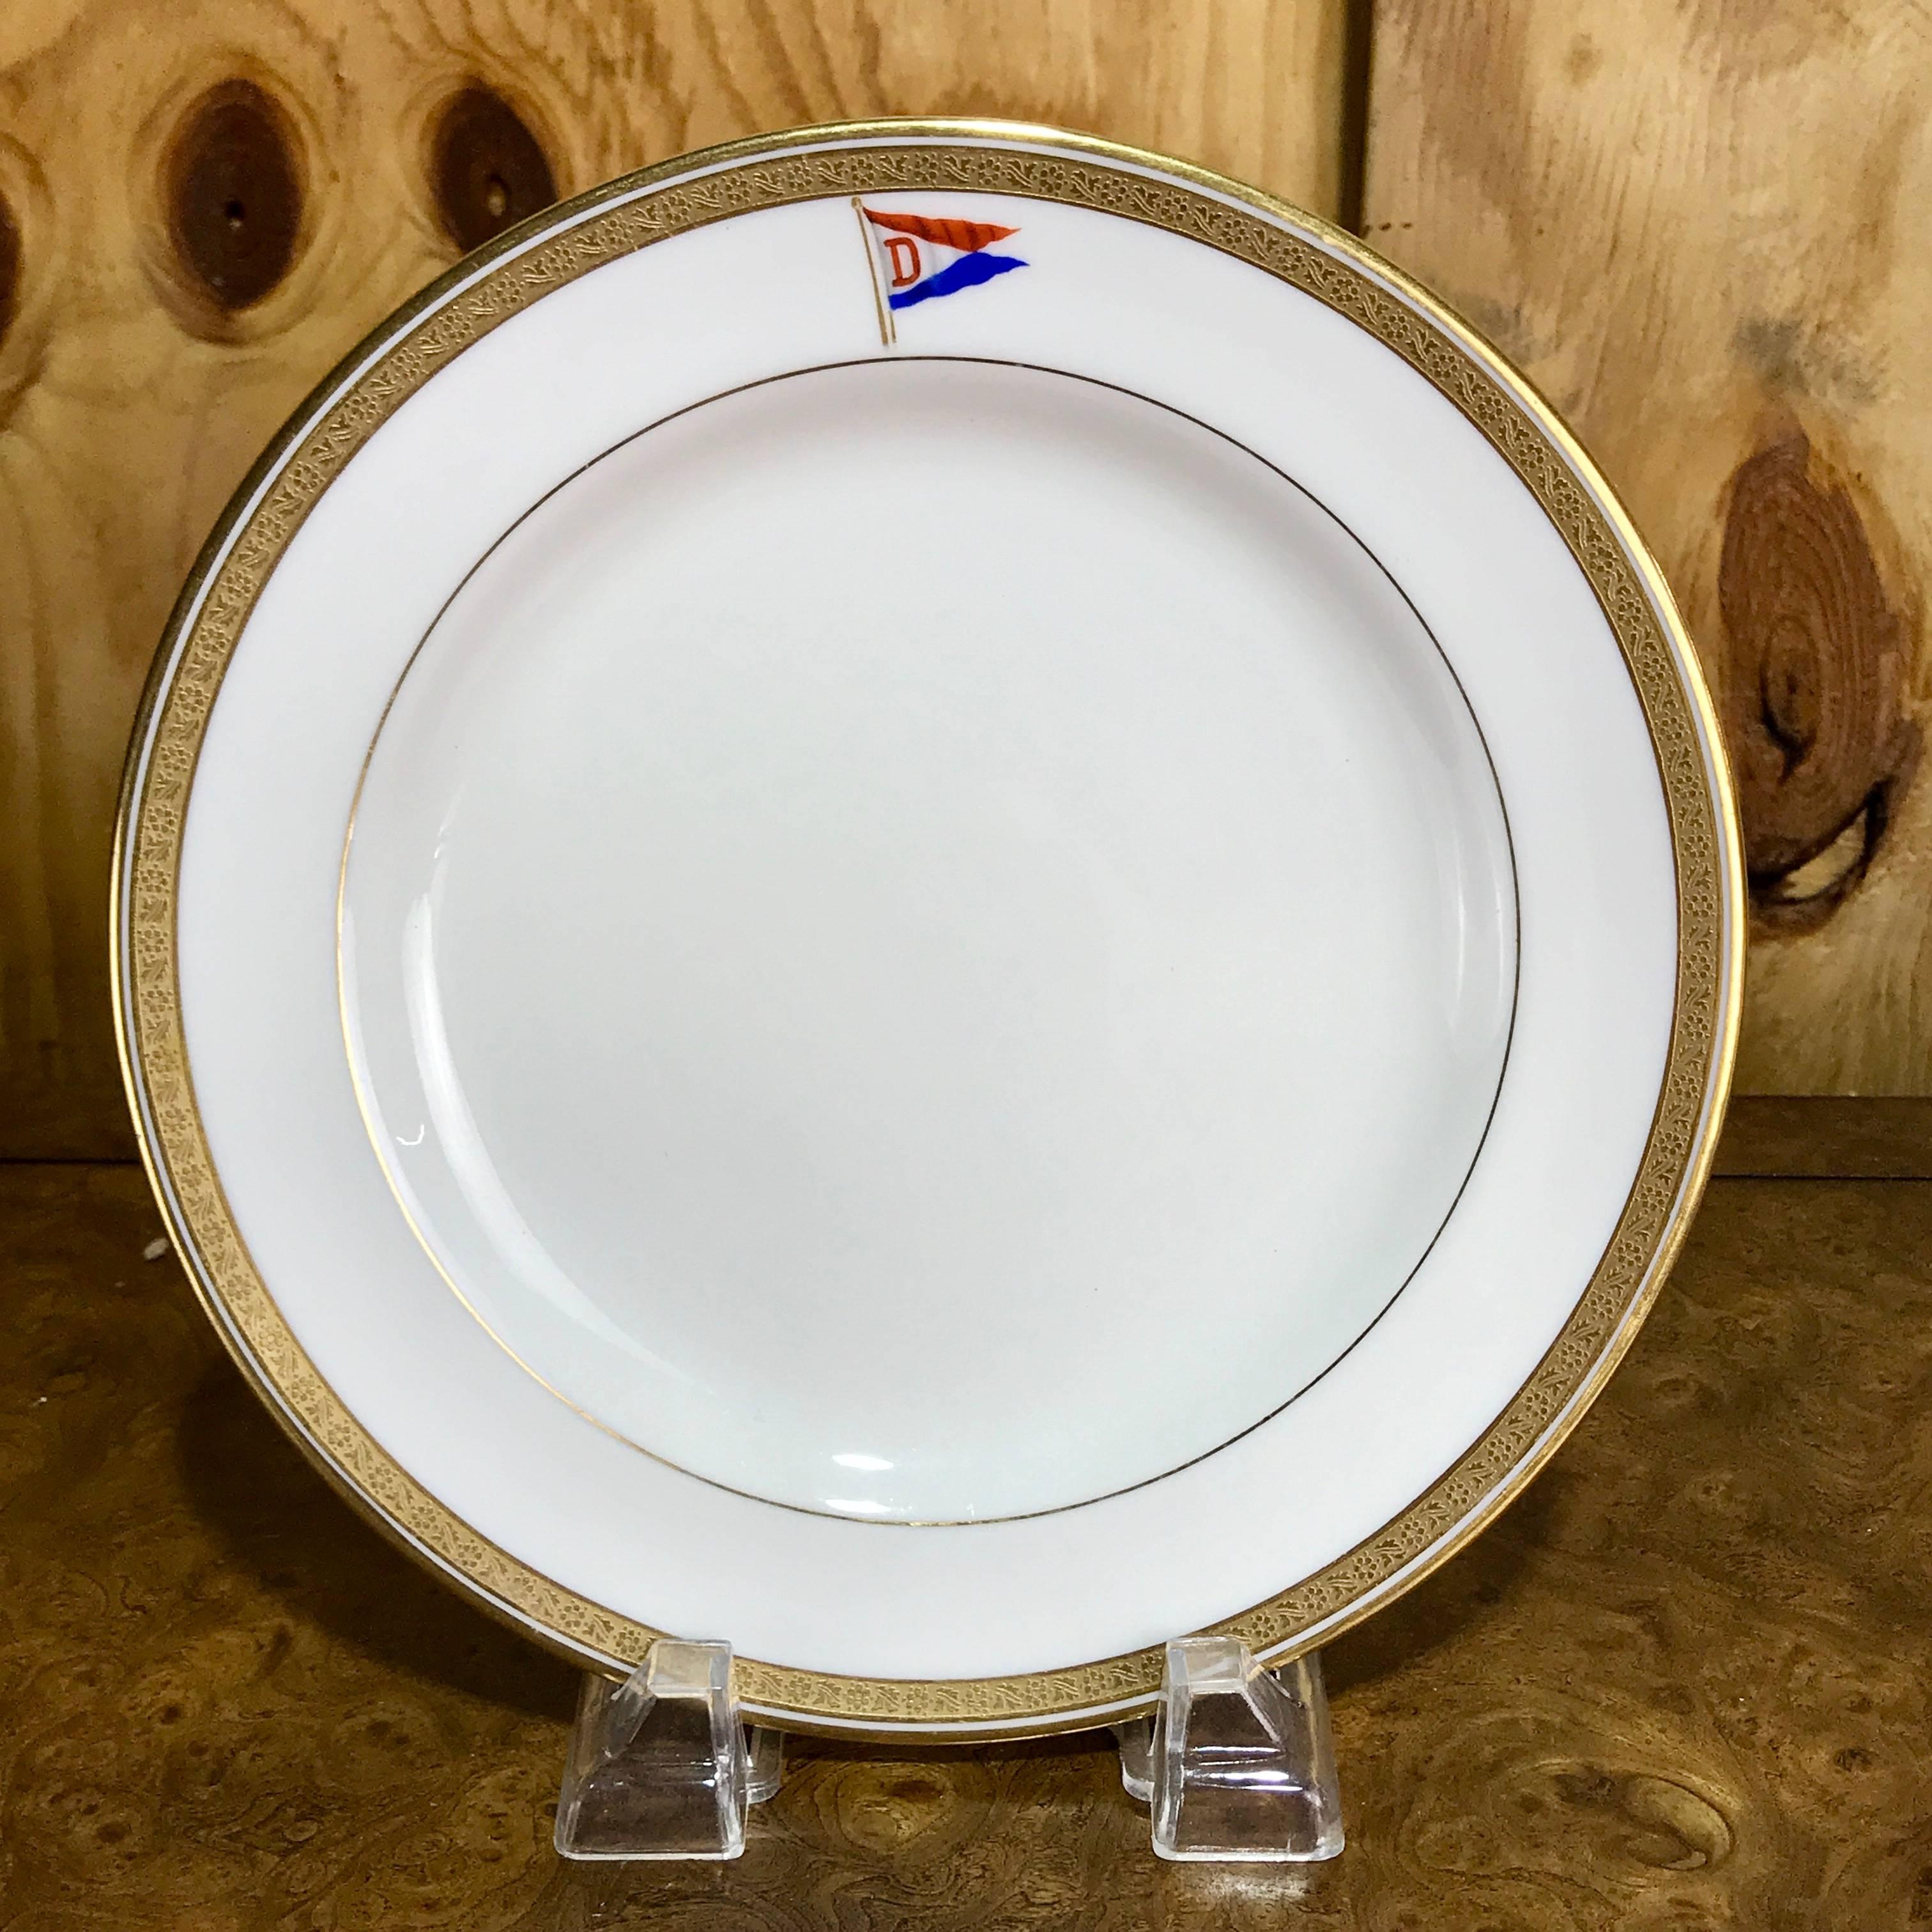 12 Cauldon first class steamship or yacht dessert plates, Each one gold encrusted rims with central crest of a red, white and blue with 